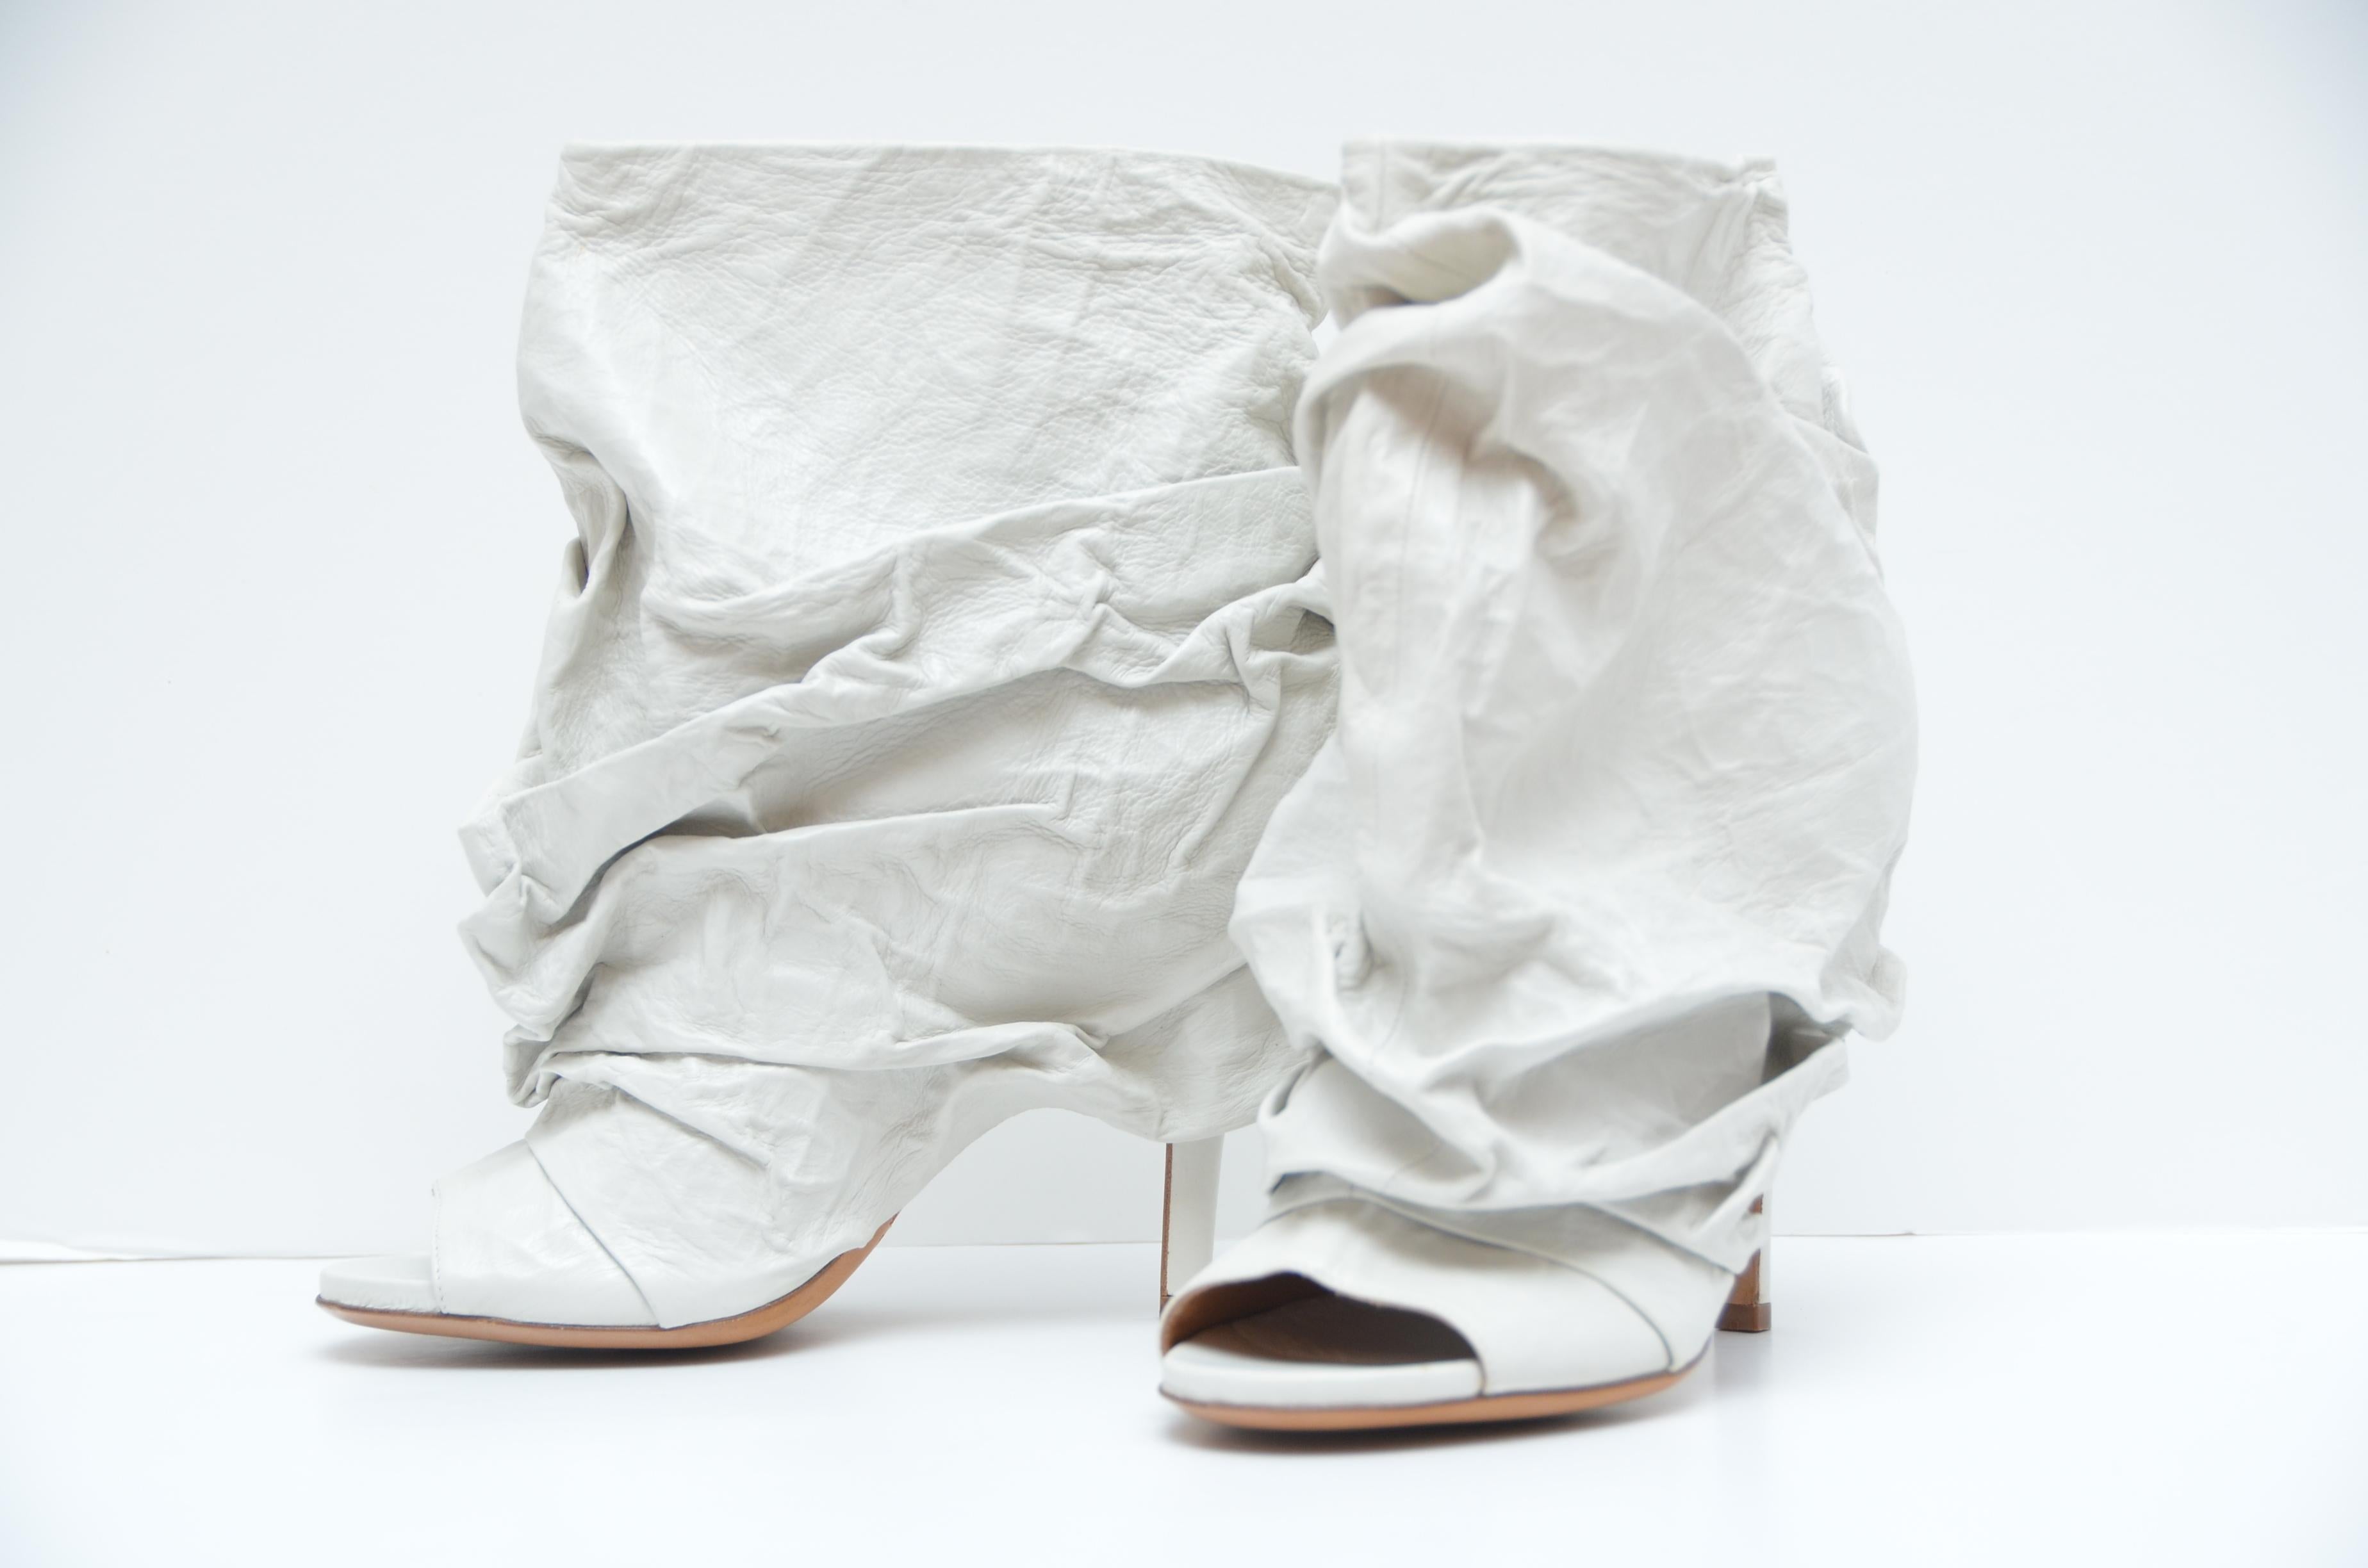 Maison Martin Margiela wrinkled Leather Peep-Toe Booties
New with box and dust bag.
Please know your sizing in this designer before purchase.
Run small.
Size 39.
Made in Italy 
 
FINAL SALE.